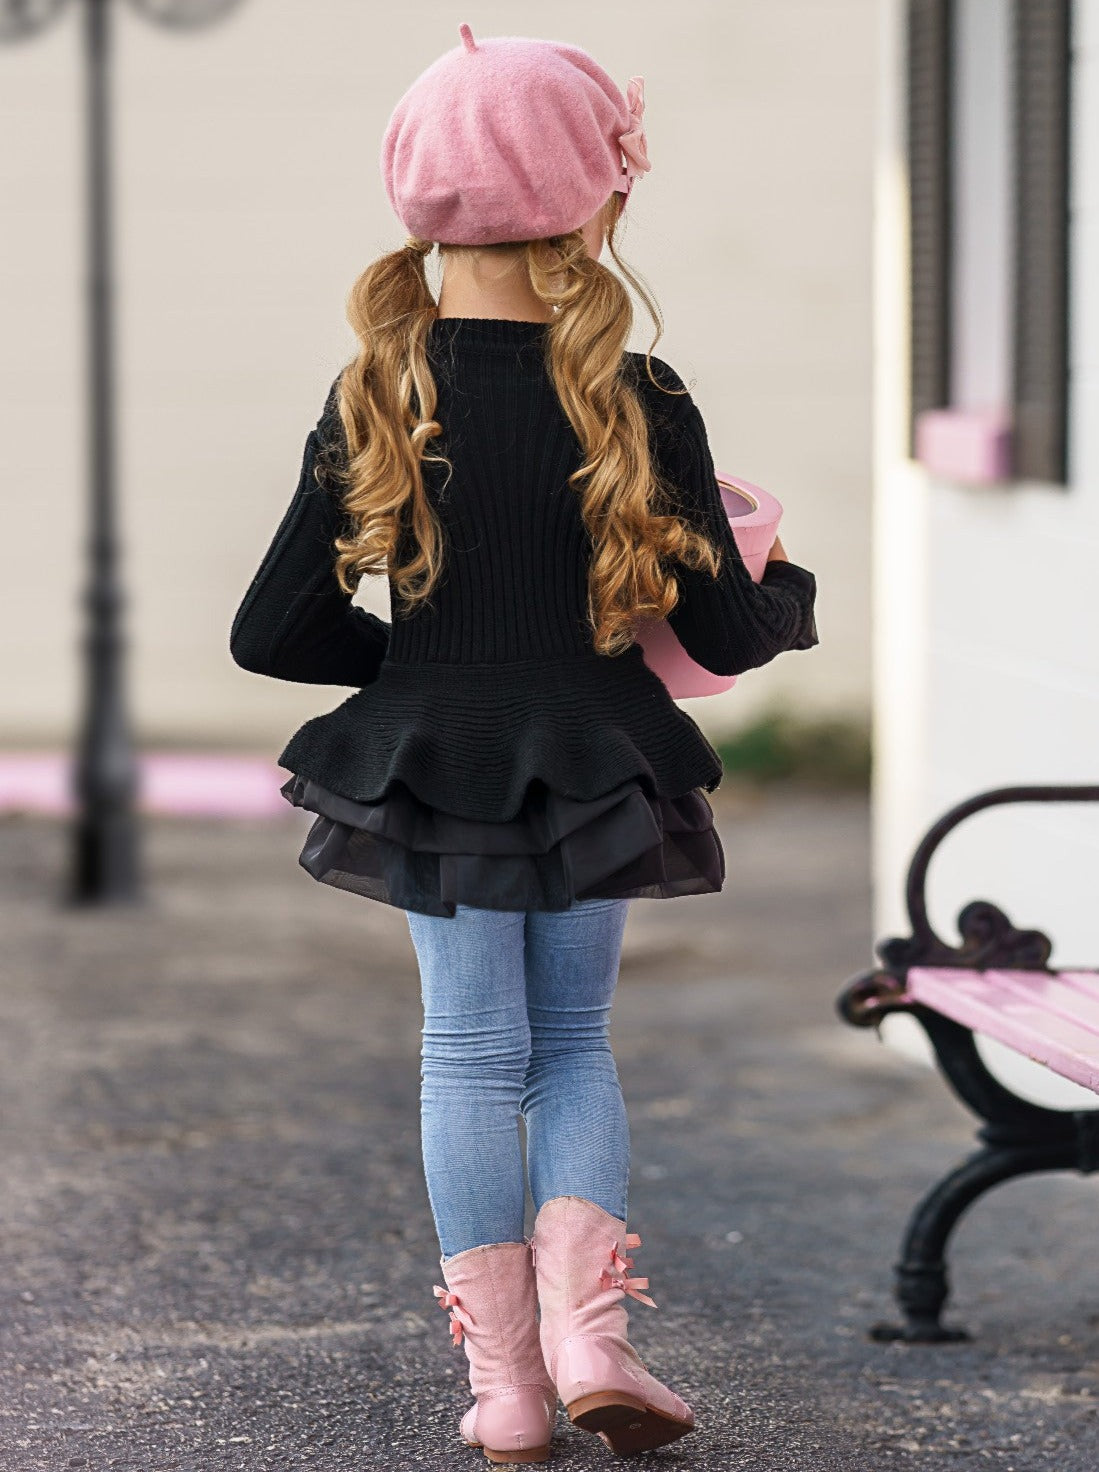 Kids Cardigans & Sweaters | Cable Knit Tutu Sweater | Mia Belle Girls